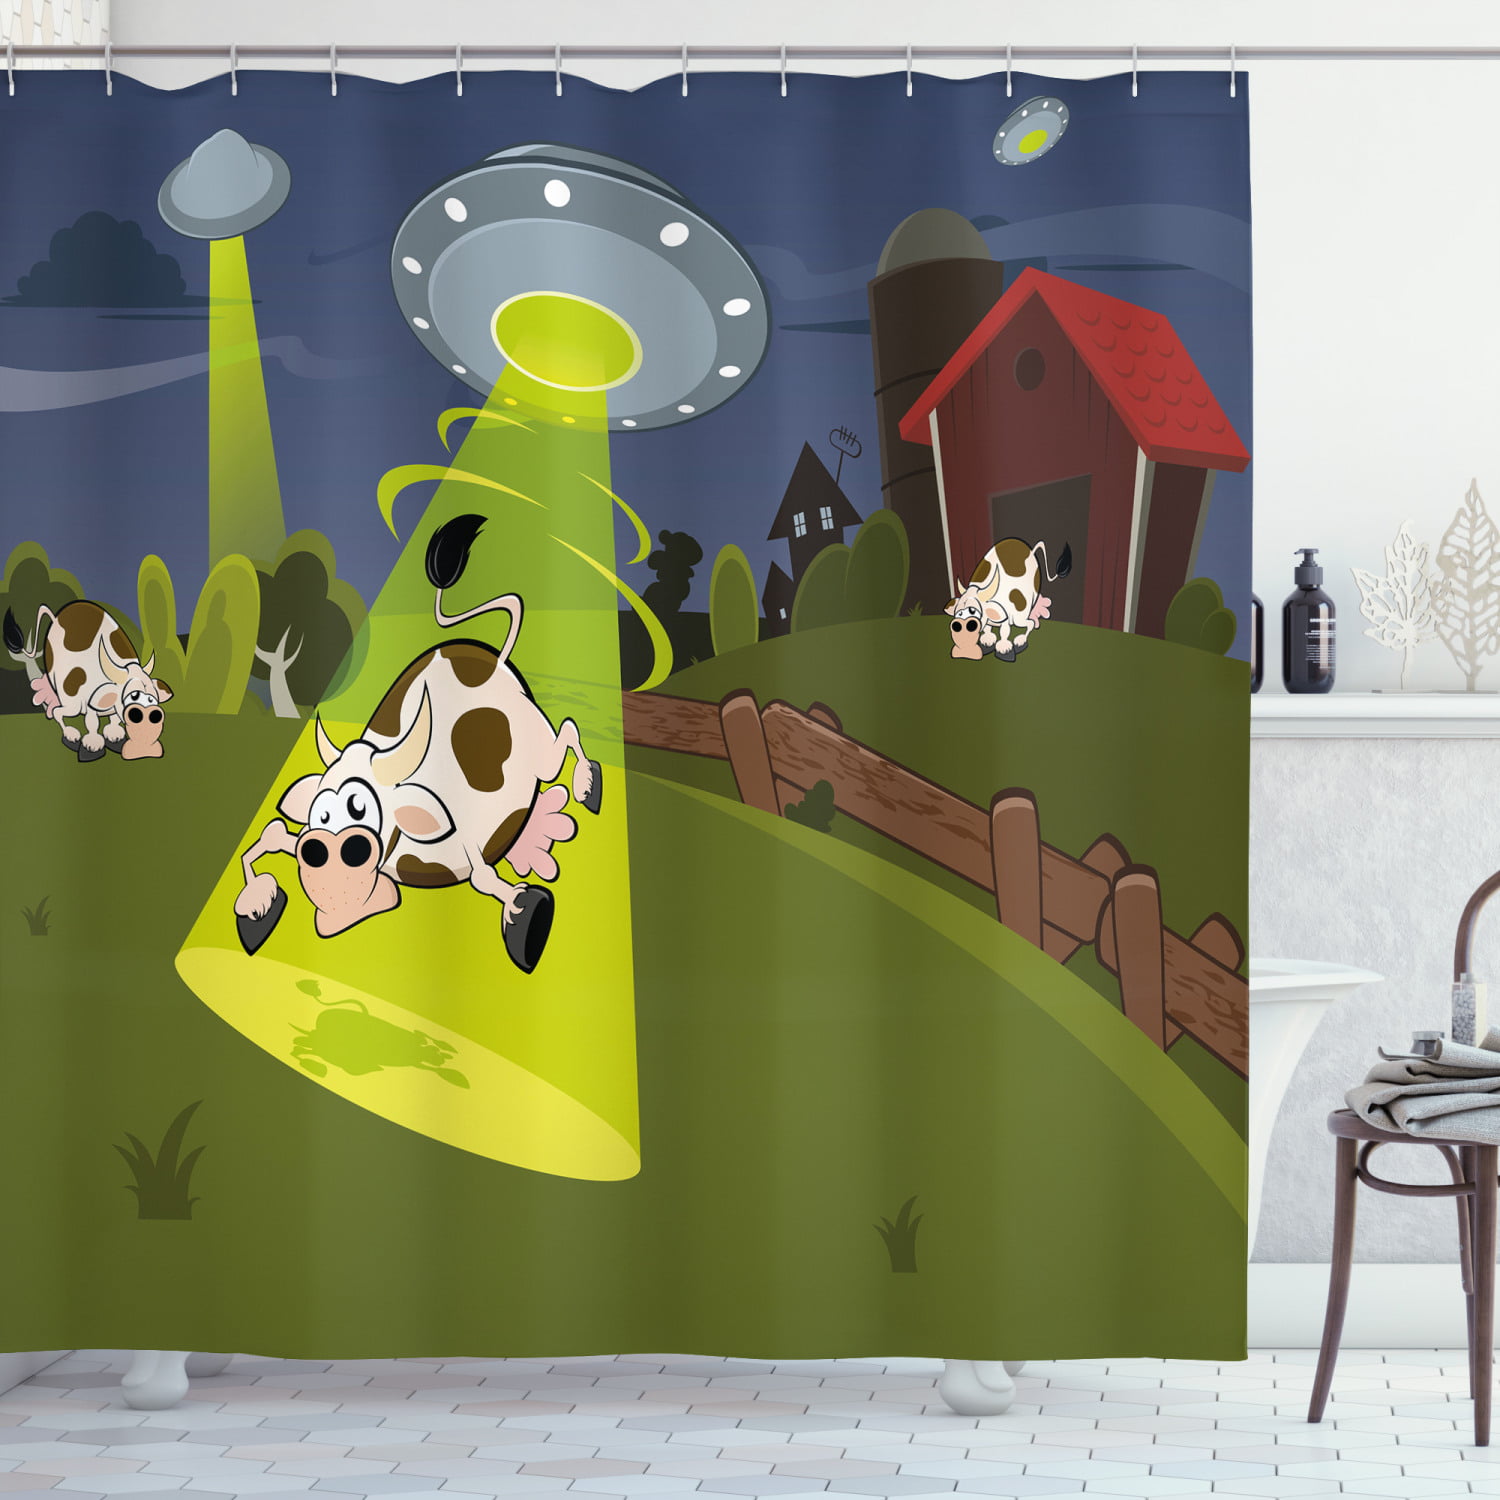 Cartoon Shower Curtain, Farm Warehouse Grass Fences Cow Alien Abduction  Funny Comics Image Artwork Print, Fabric Bathroom Set with Hooks, 69W X 75L  Inches Long, Multicolor, by Ambesonne 